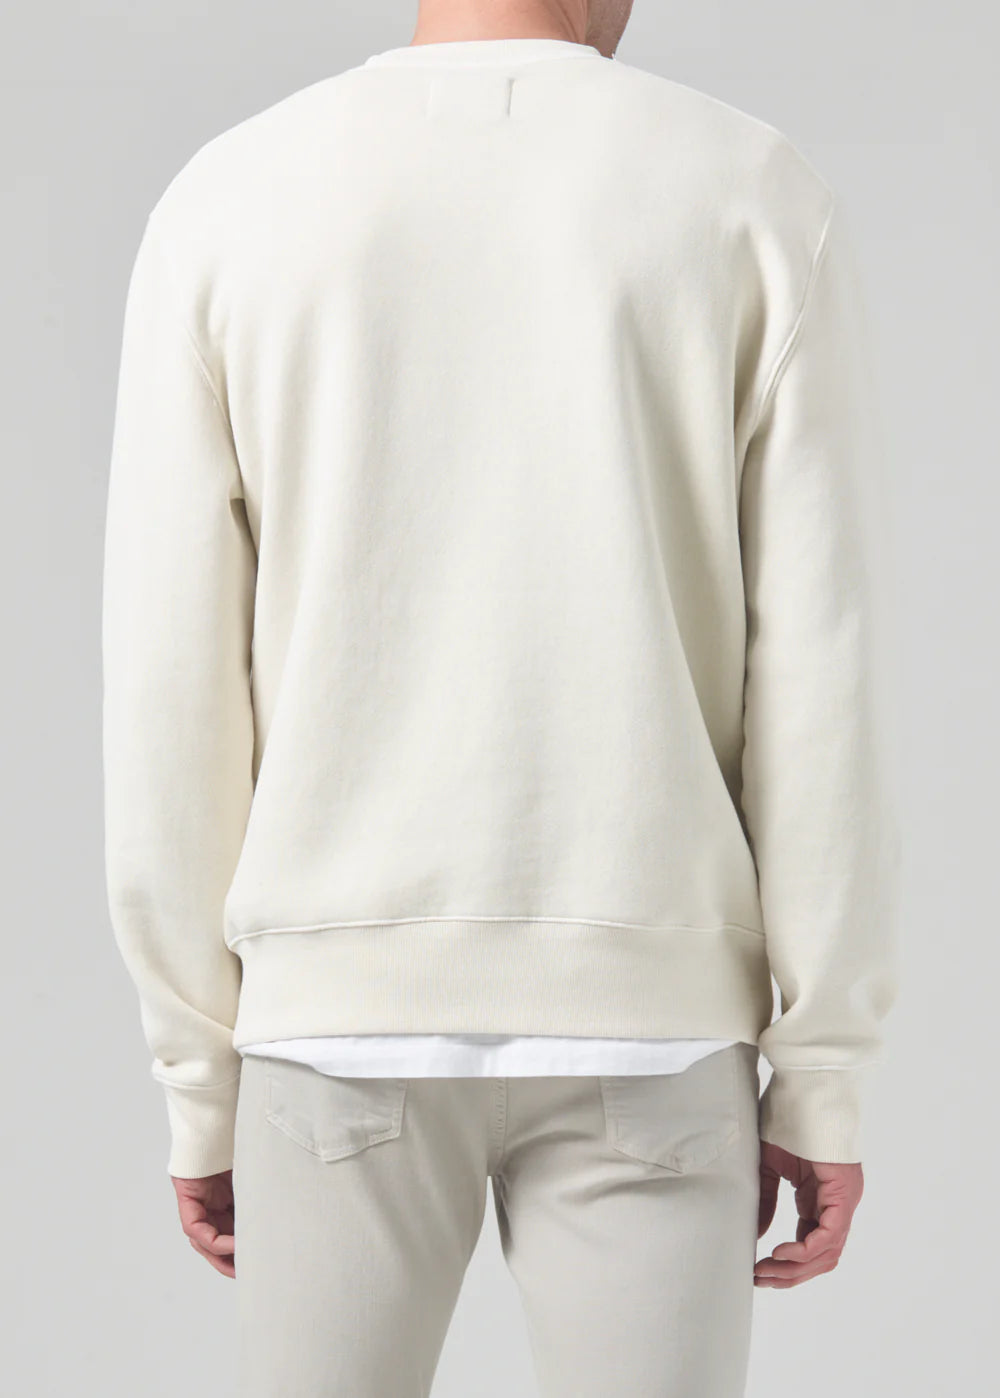 Backside view of a model wearing the Vintage crewneck sweater from Citizens of Humanity in off-white cream color. Showcases the regular, comfy fit.